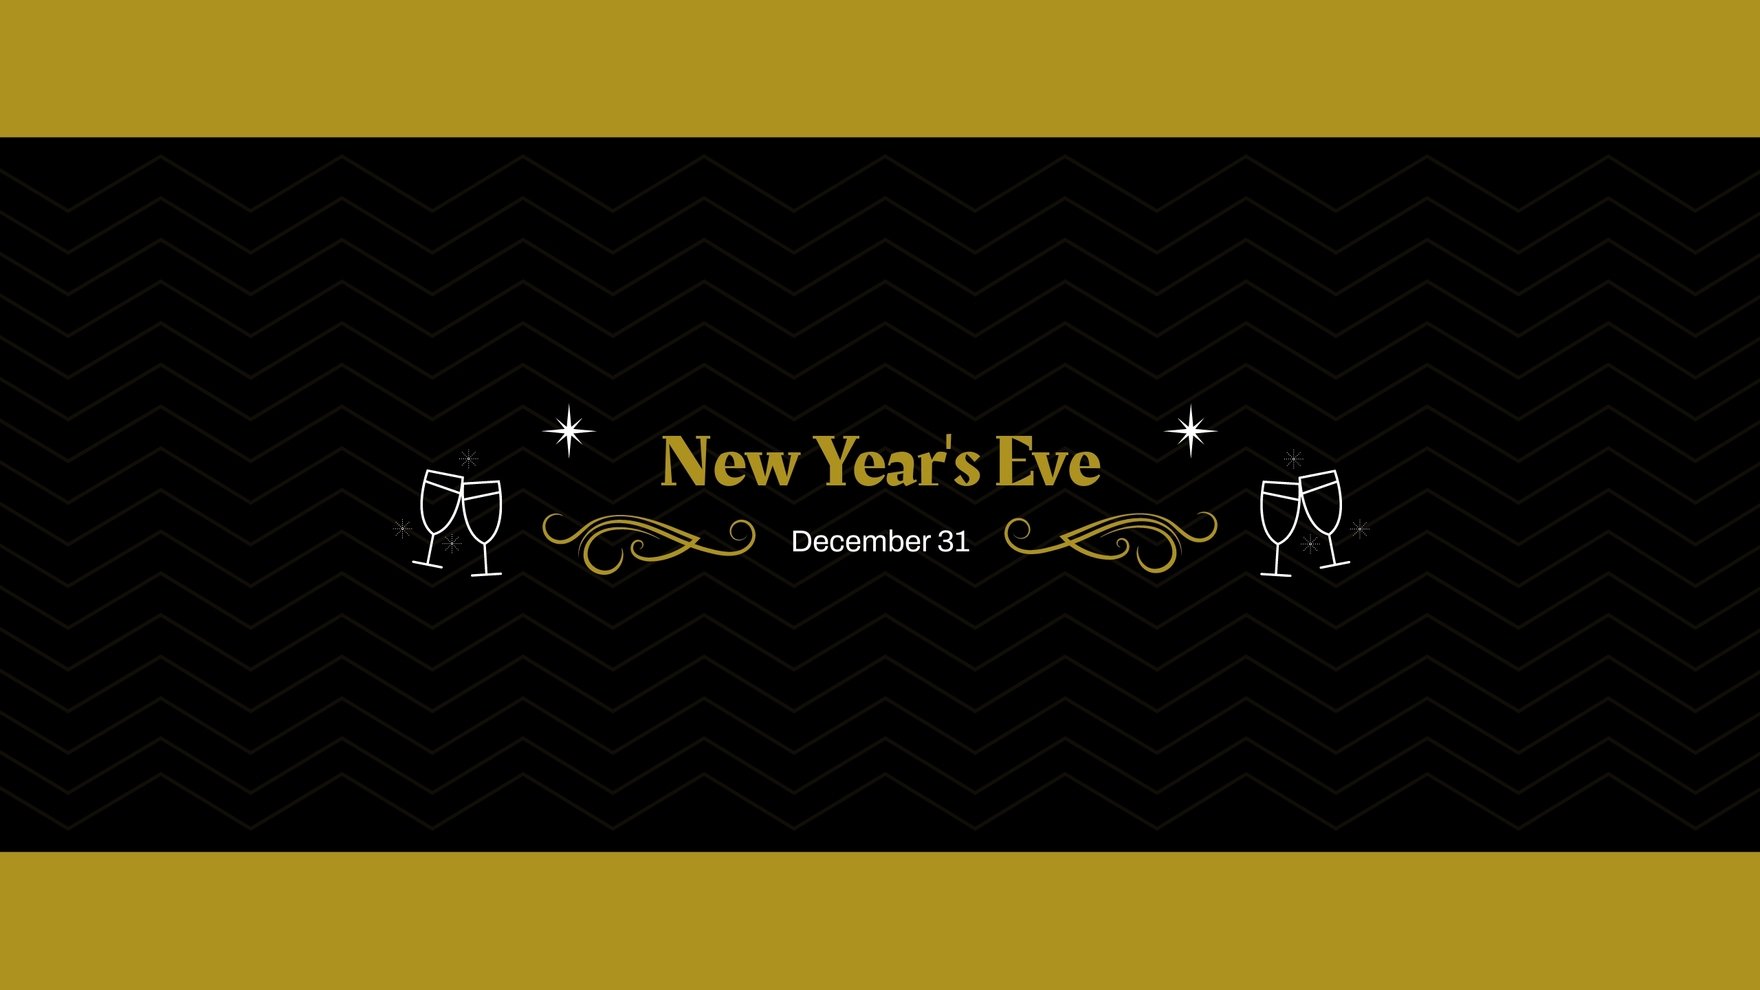 New Year's Eve Youtube Banner